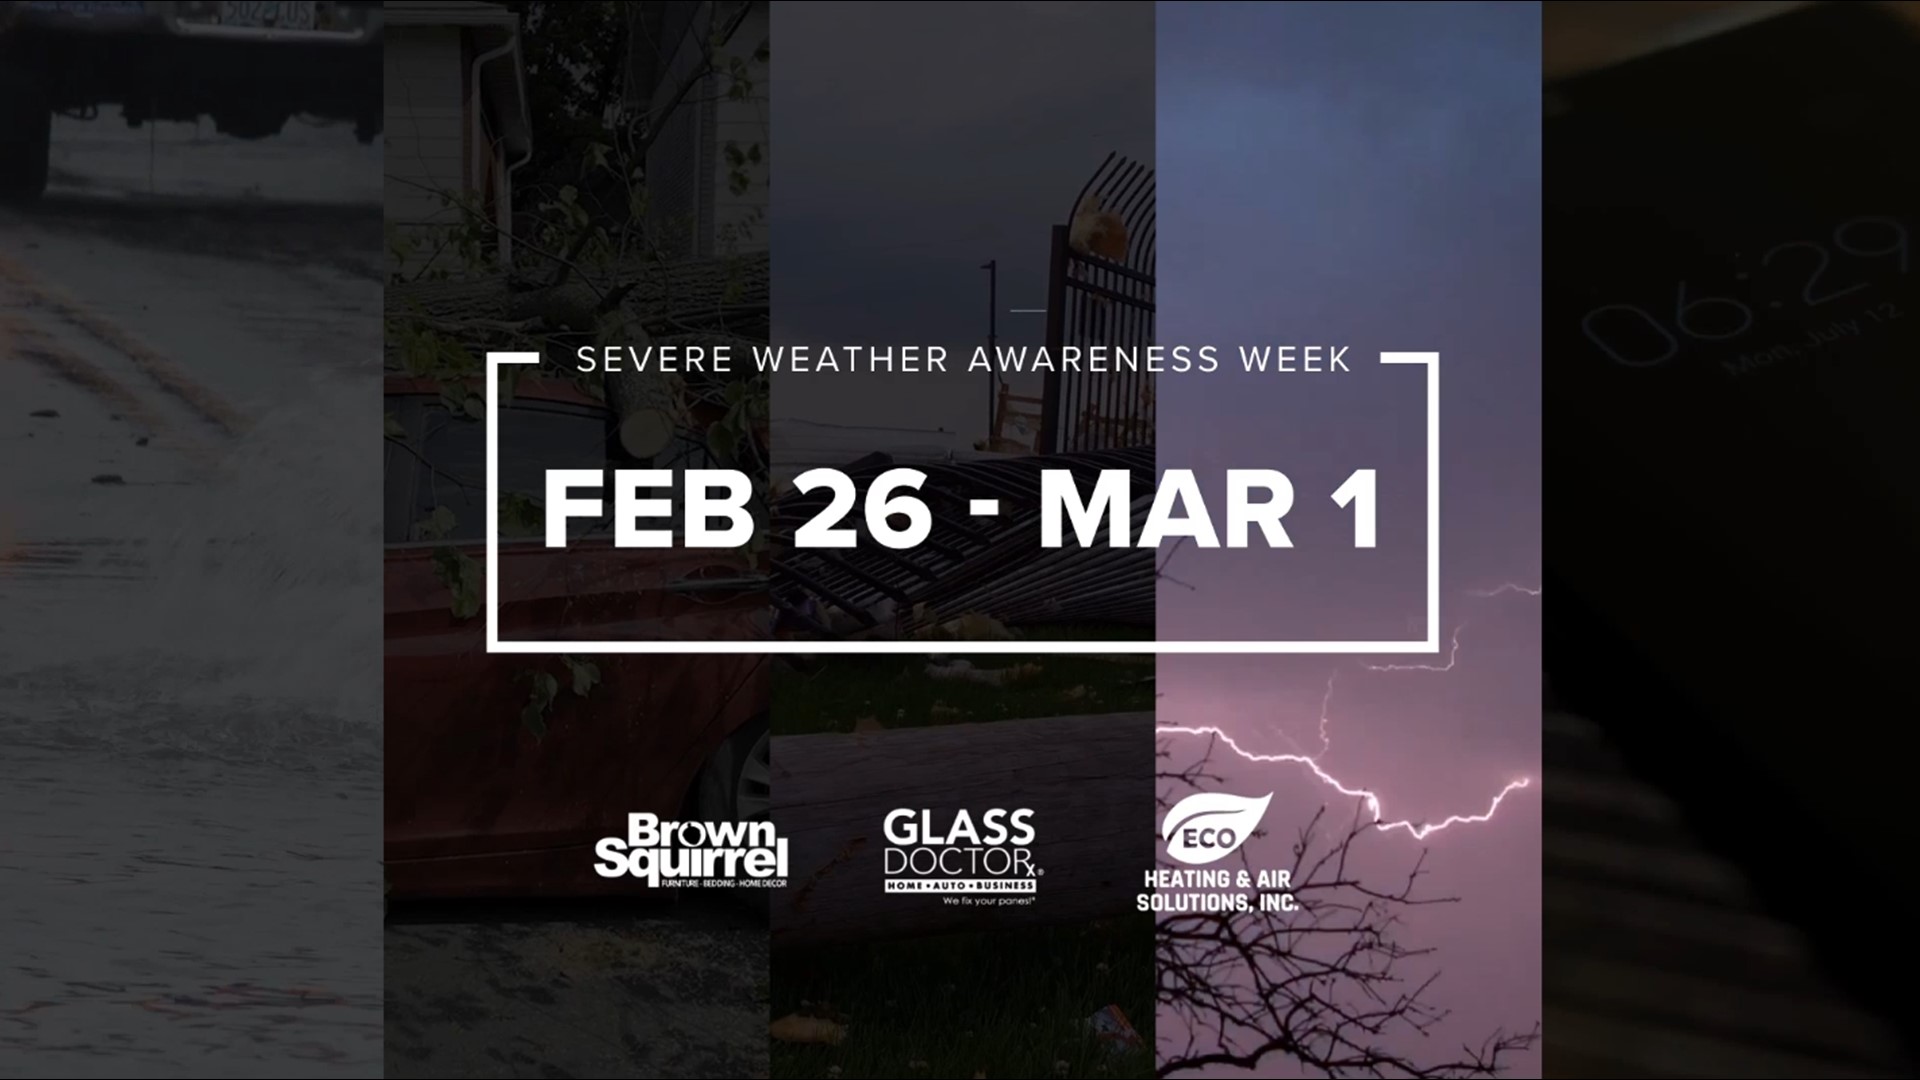 From severe storms, tornadoes, flooding, and hail -- here's how to stay safe before March comes in like a lion.